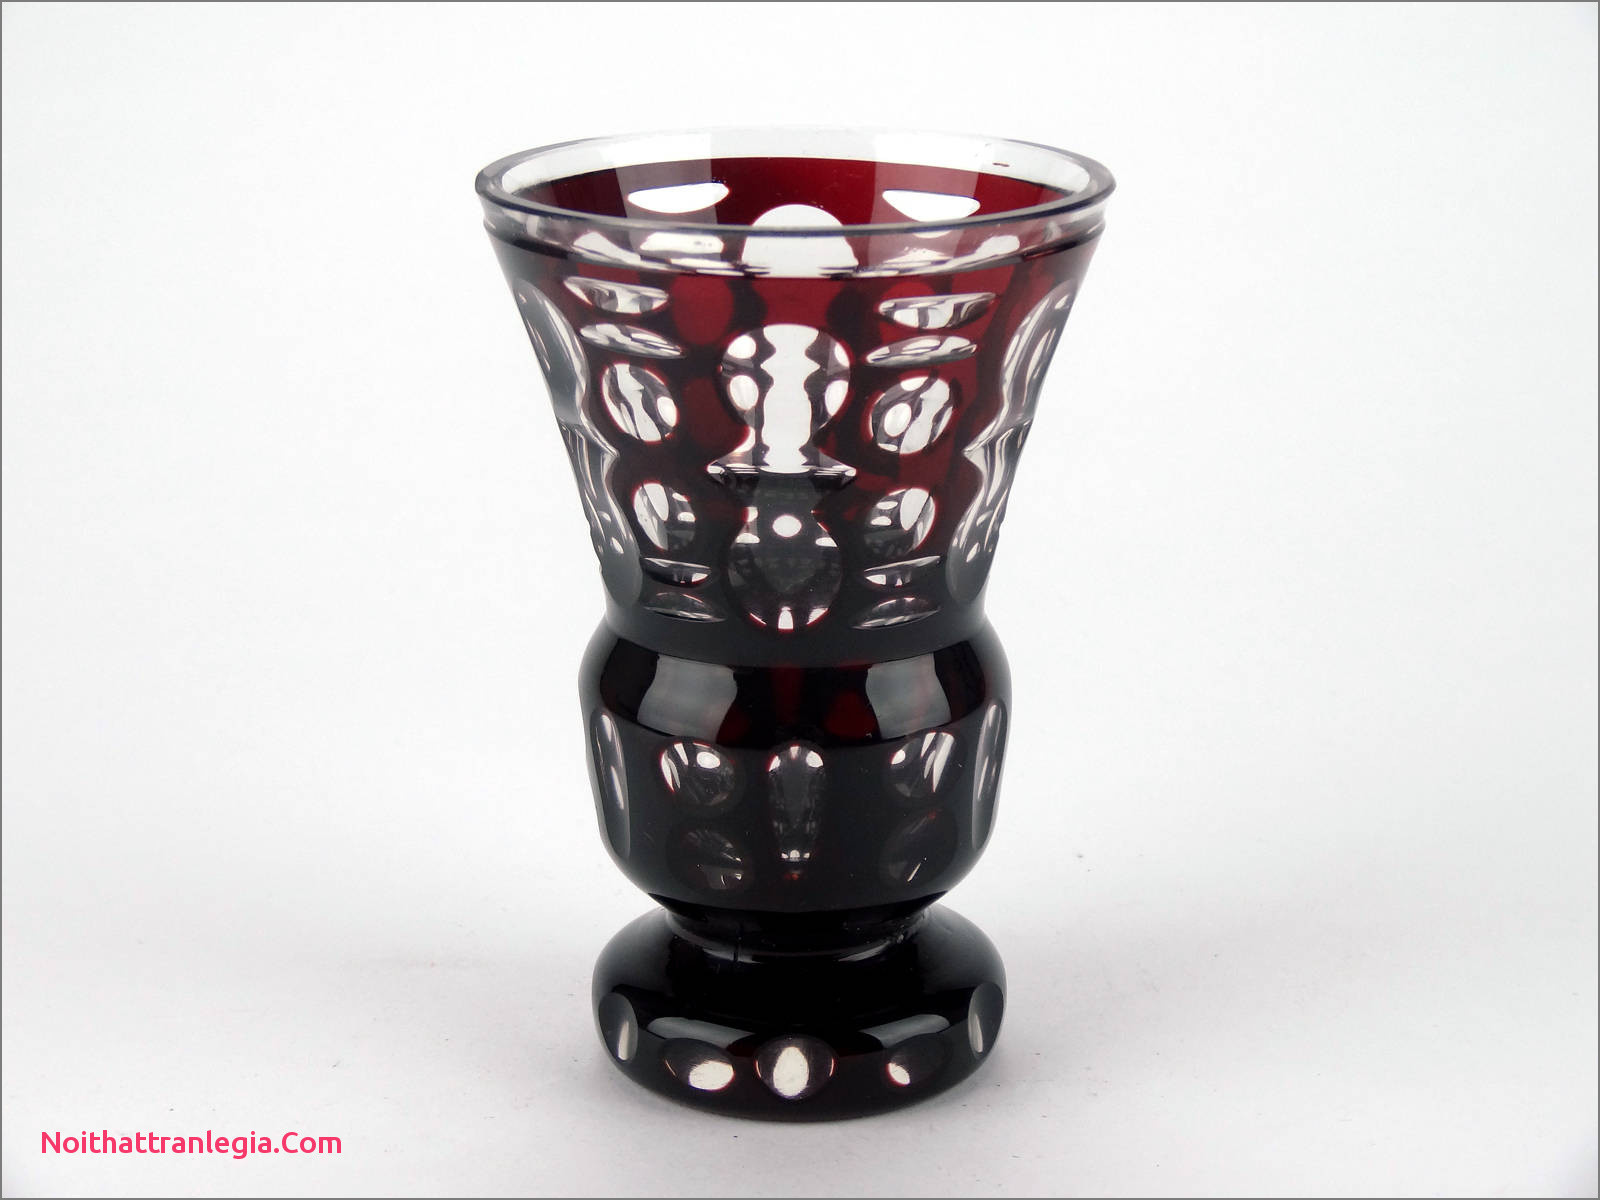 21 Awesome Vintage Glass Vases for Sale 2024 free download vintage glass vases for sale of 20 cut glass antique vase noithattranlegia vases design regarding antique c1910 bohemian cut to clear red glass vase czech ruby red cut glass goblet